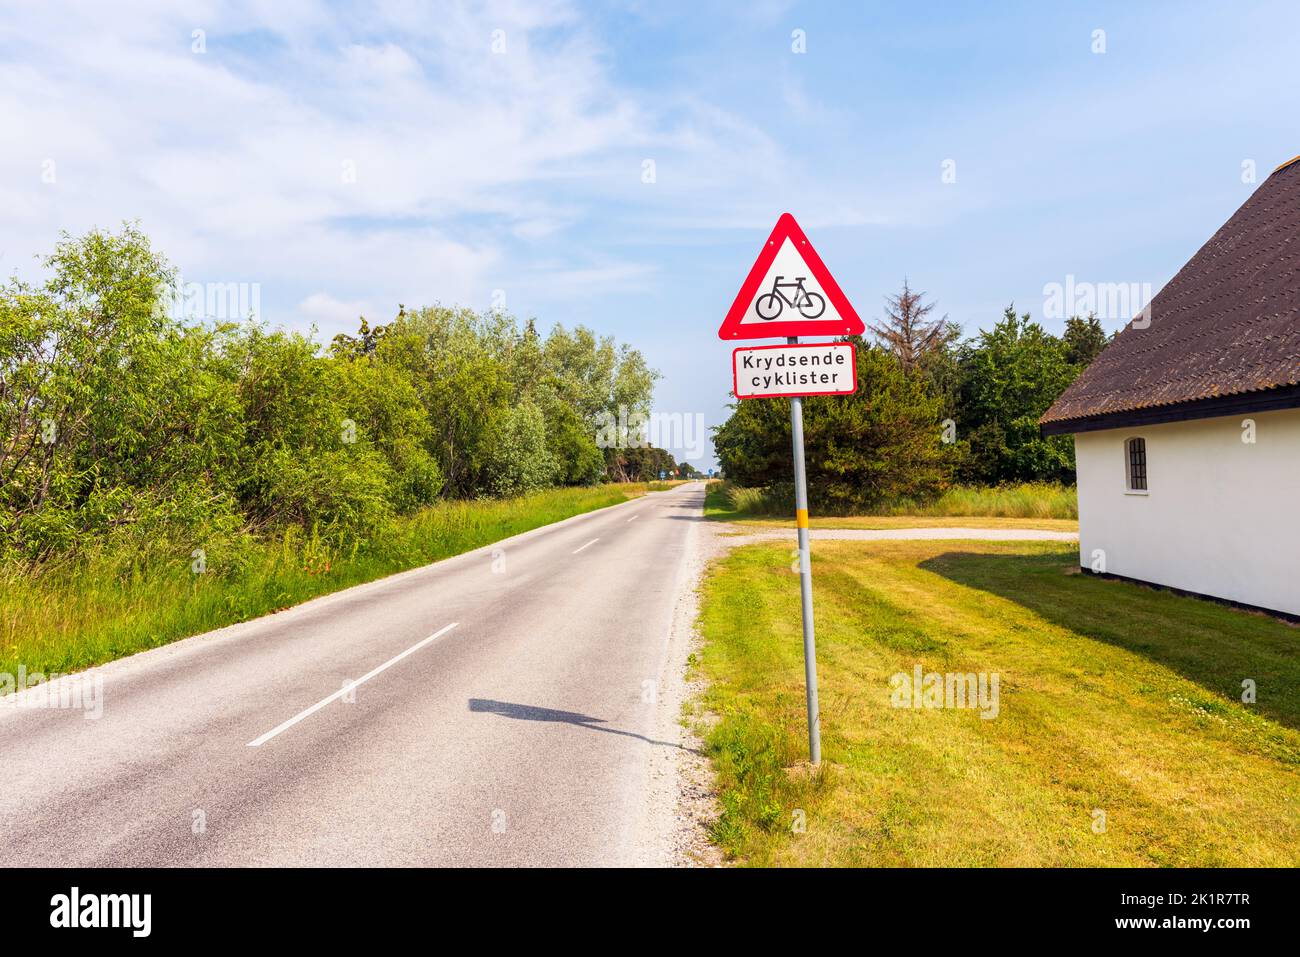 Crossing Cyclists Warning Sign along the road in Jutland, Denmark on summer day Stock Photo